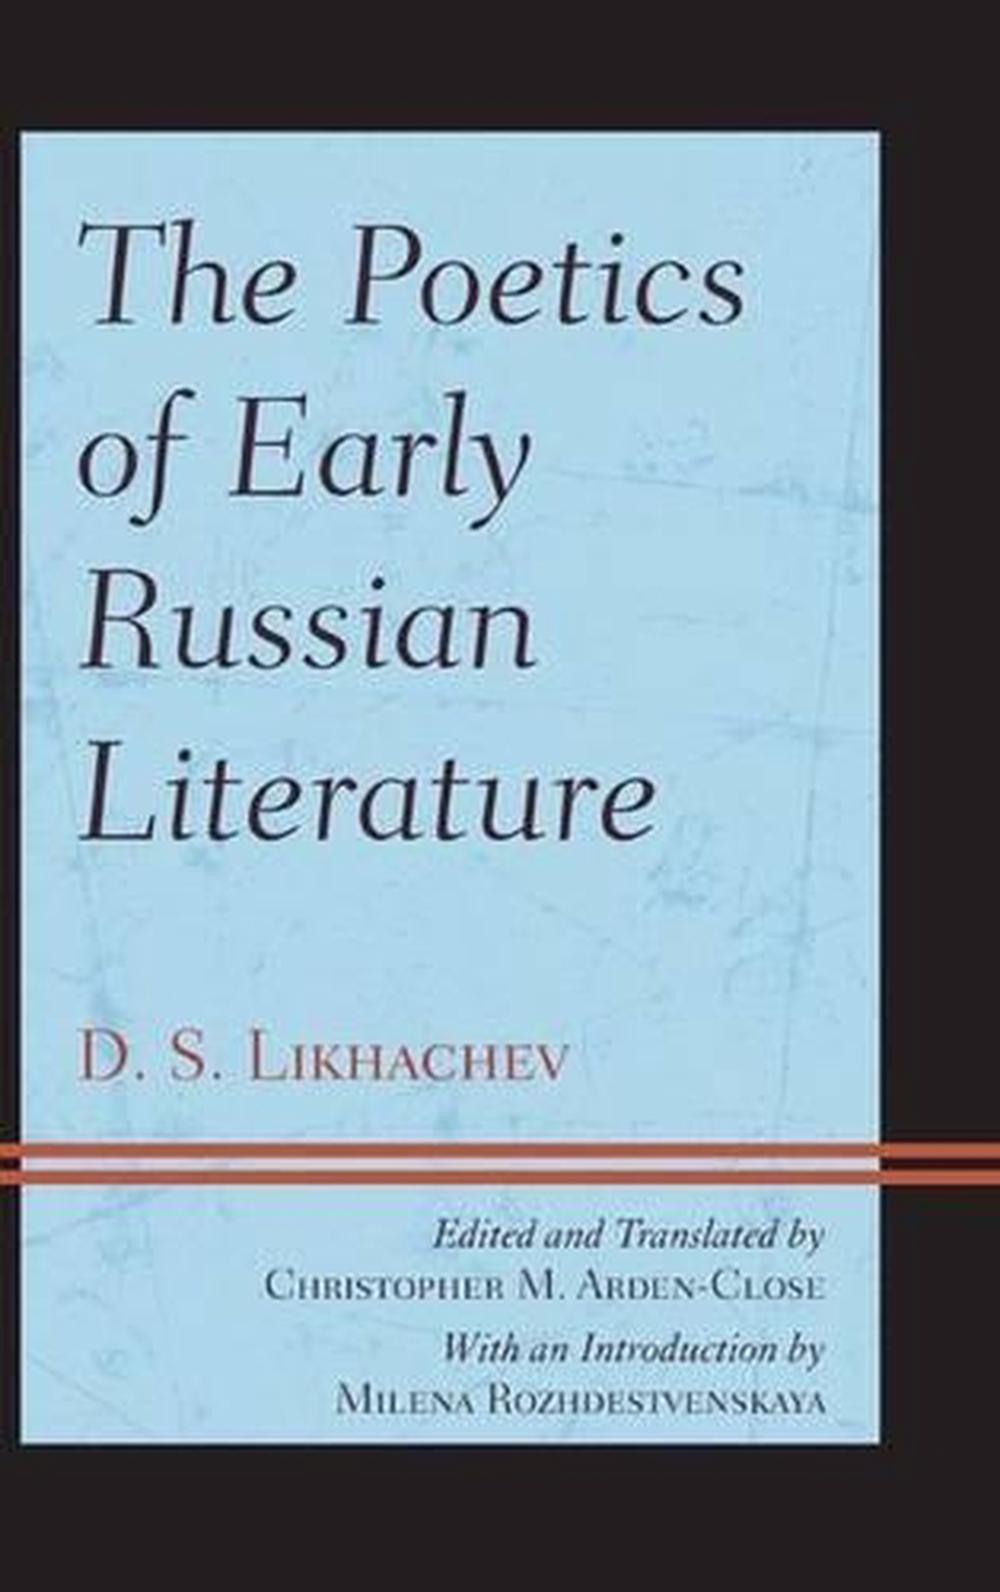 Poetics of Early Russian Literature by Dmitrii S. Likhachev (English ...